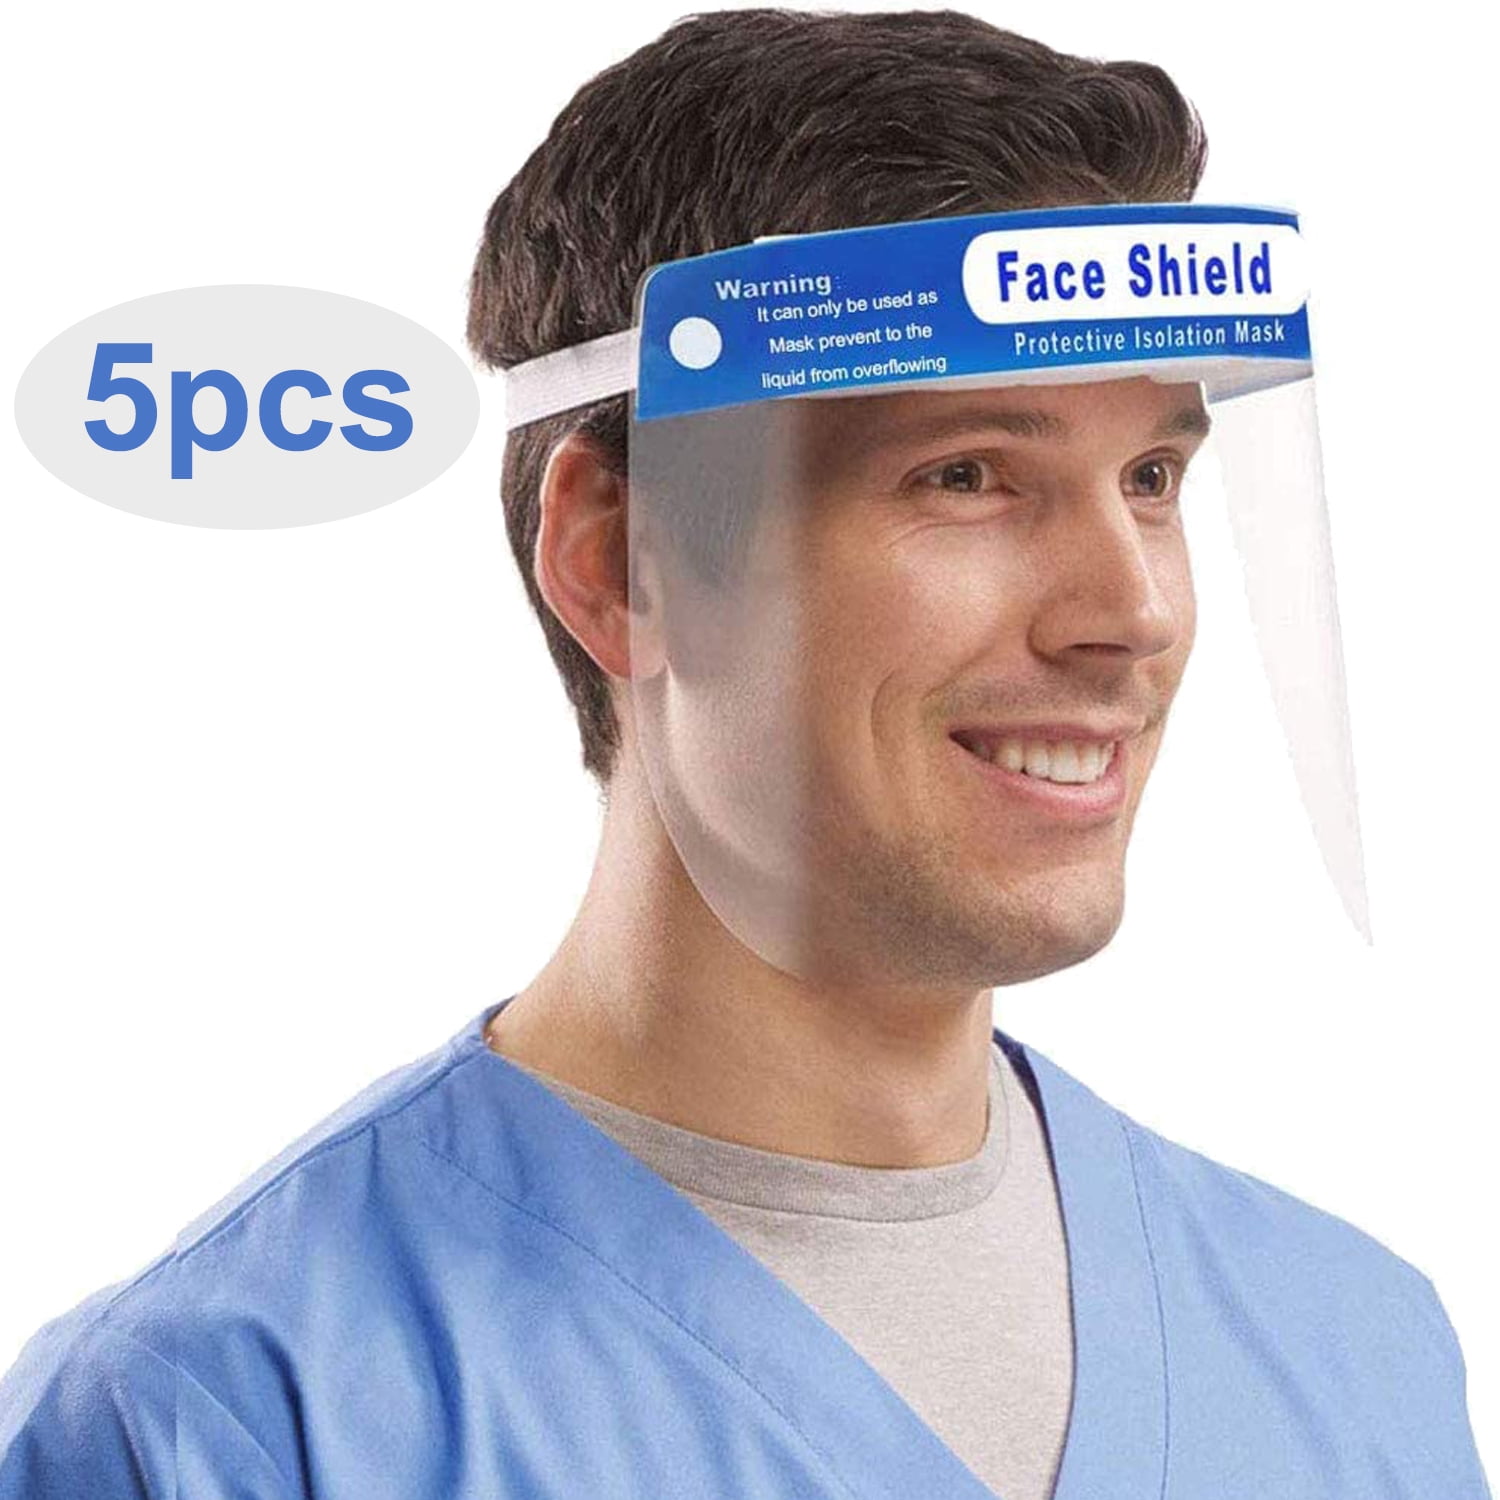 Details about   2Face Shield Transparent Reusable Mask Glasses Visor Anti-Fog Clear Cover Safety 